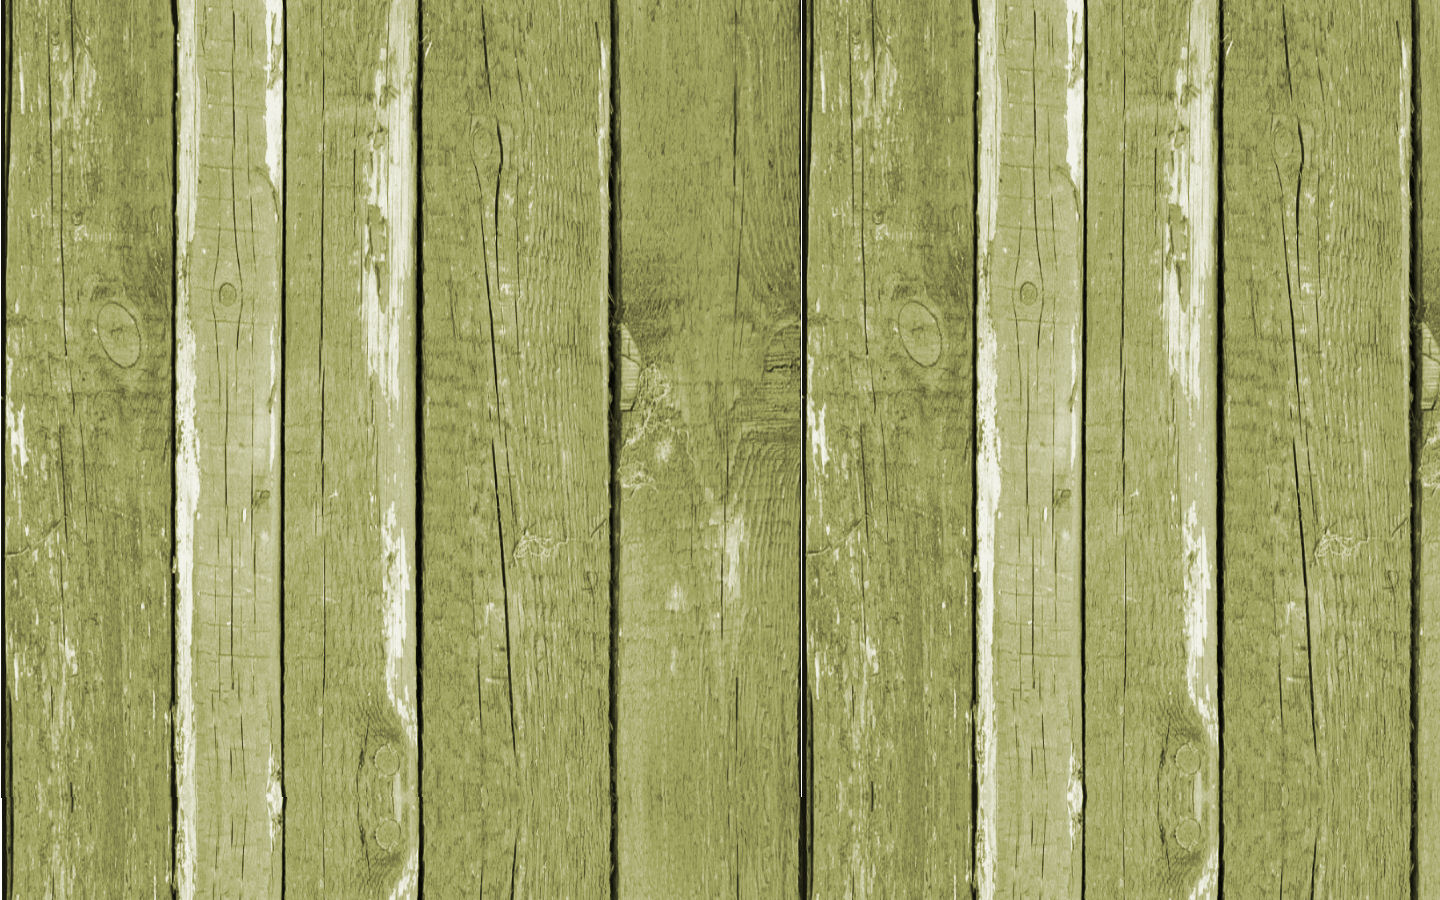 Wood Wall Twitter Backgrounds Wood Wall Twitter Themes 1440x900